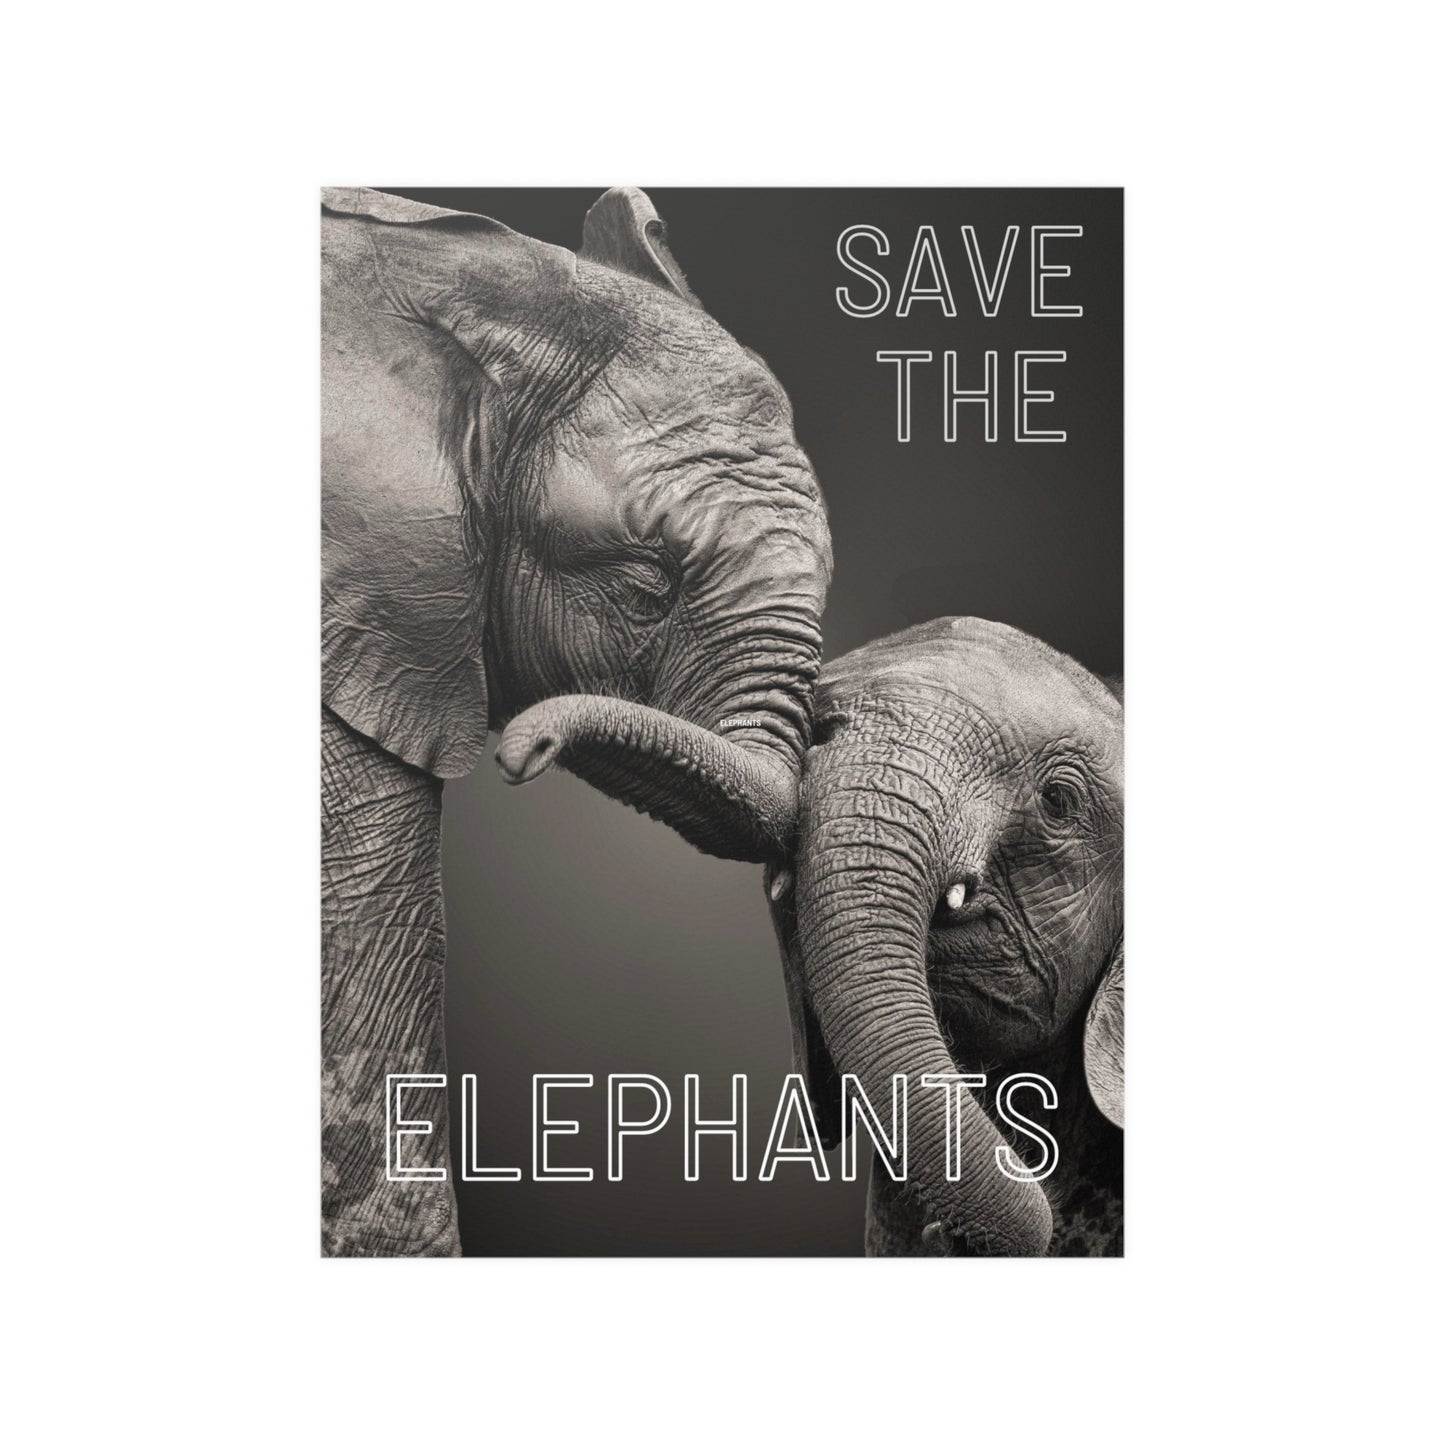 Elephant and Baby Elephant Poster, Endangered Animal Poster,